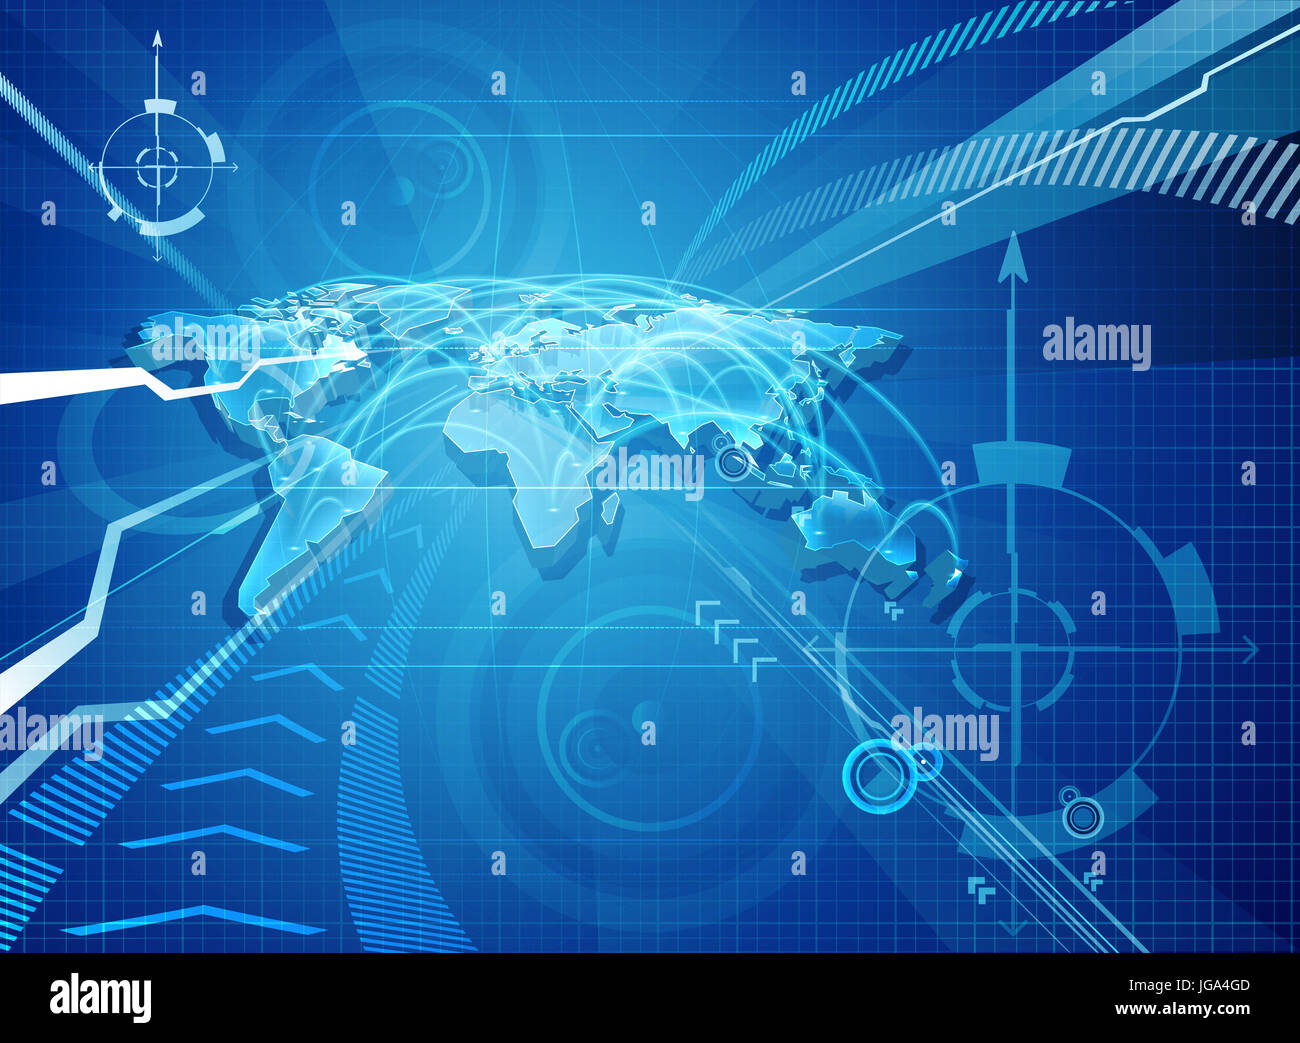 World map background concept abstract with flight paths or communication links. A technology or globalisation concept Stock Photo